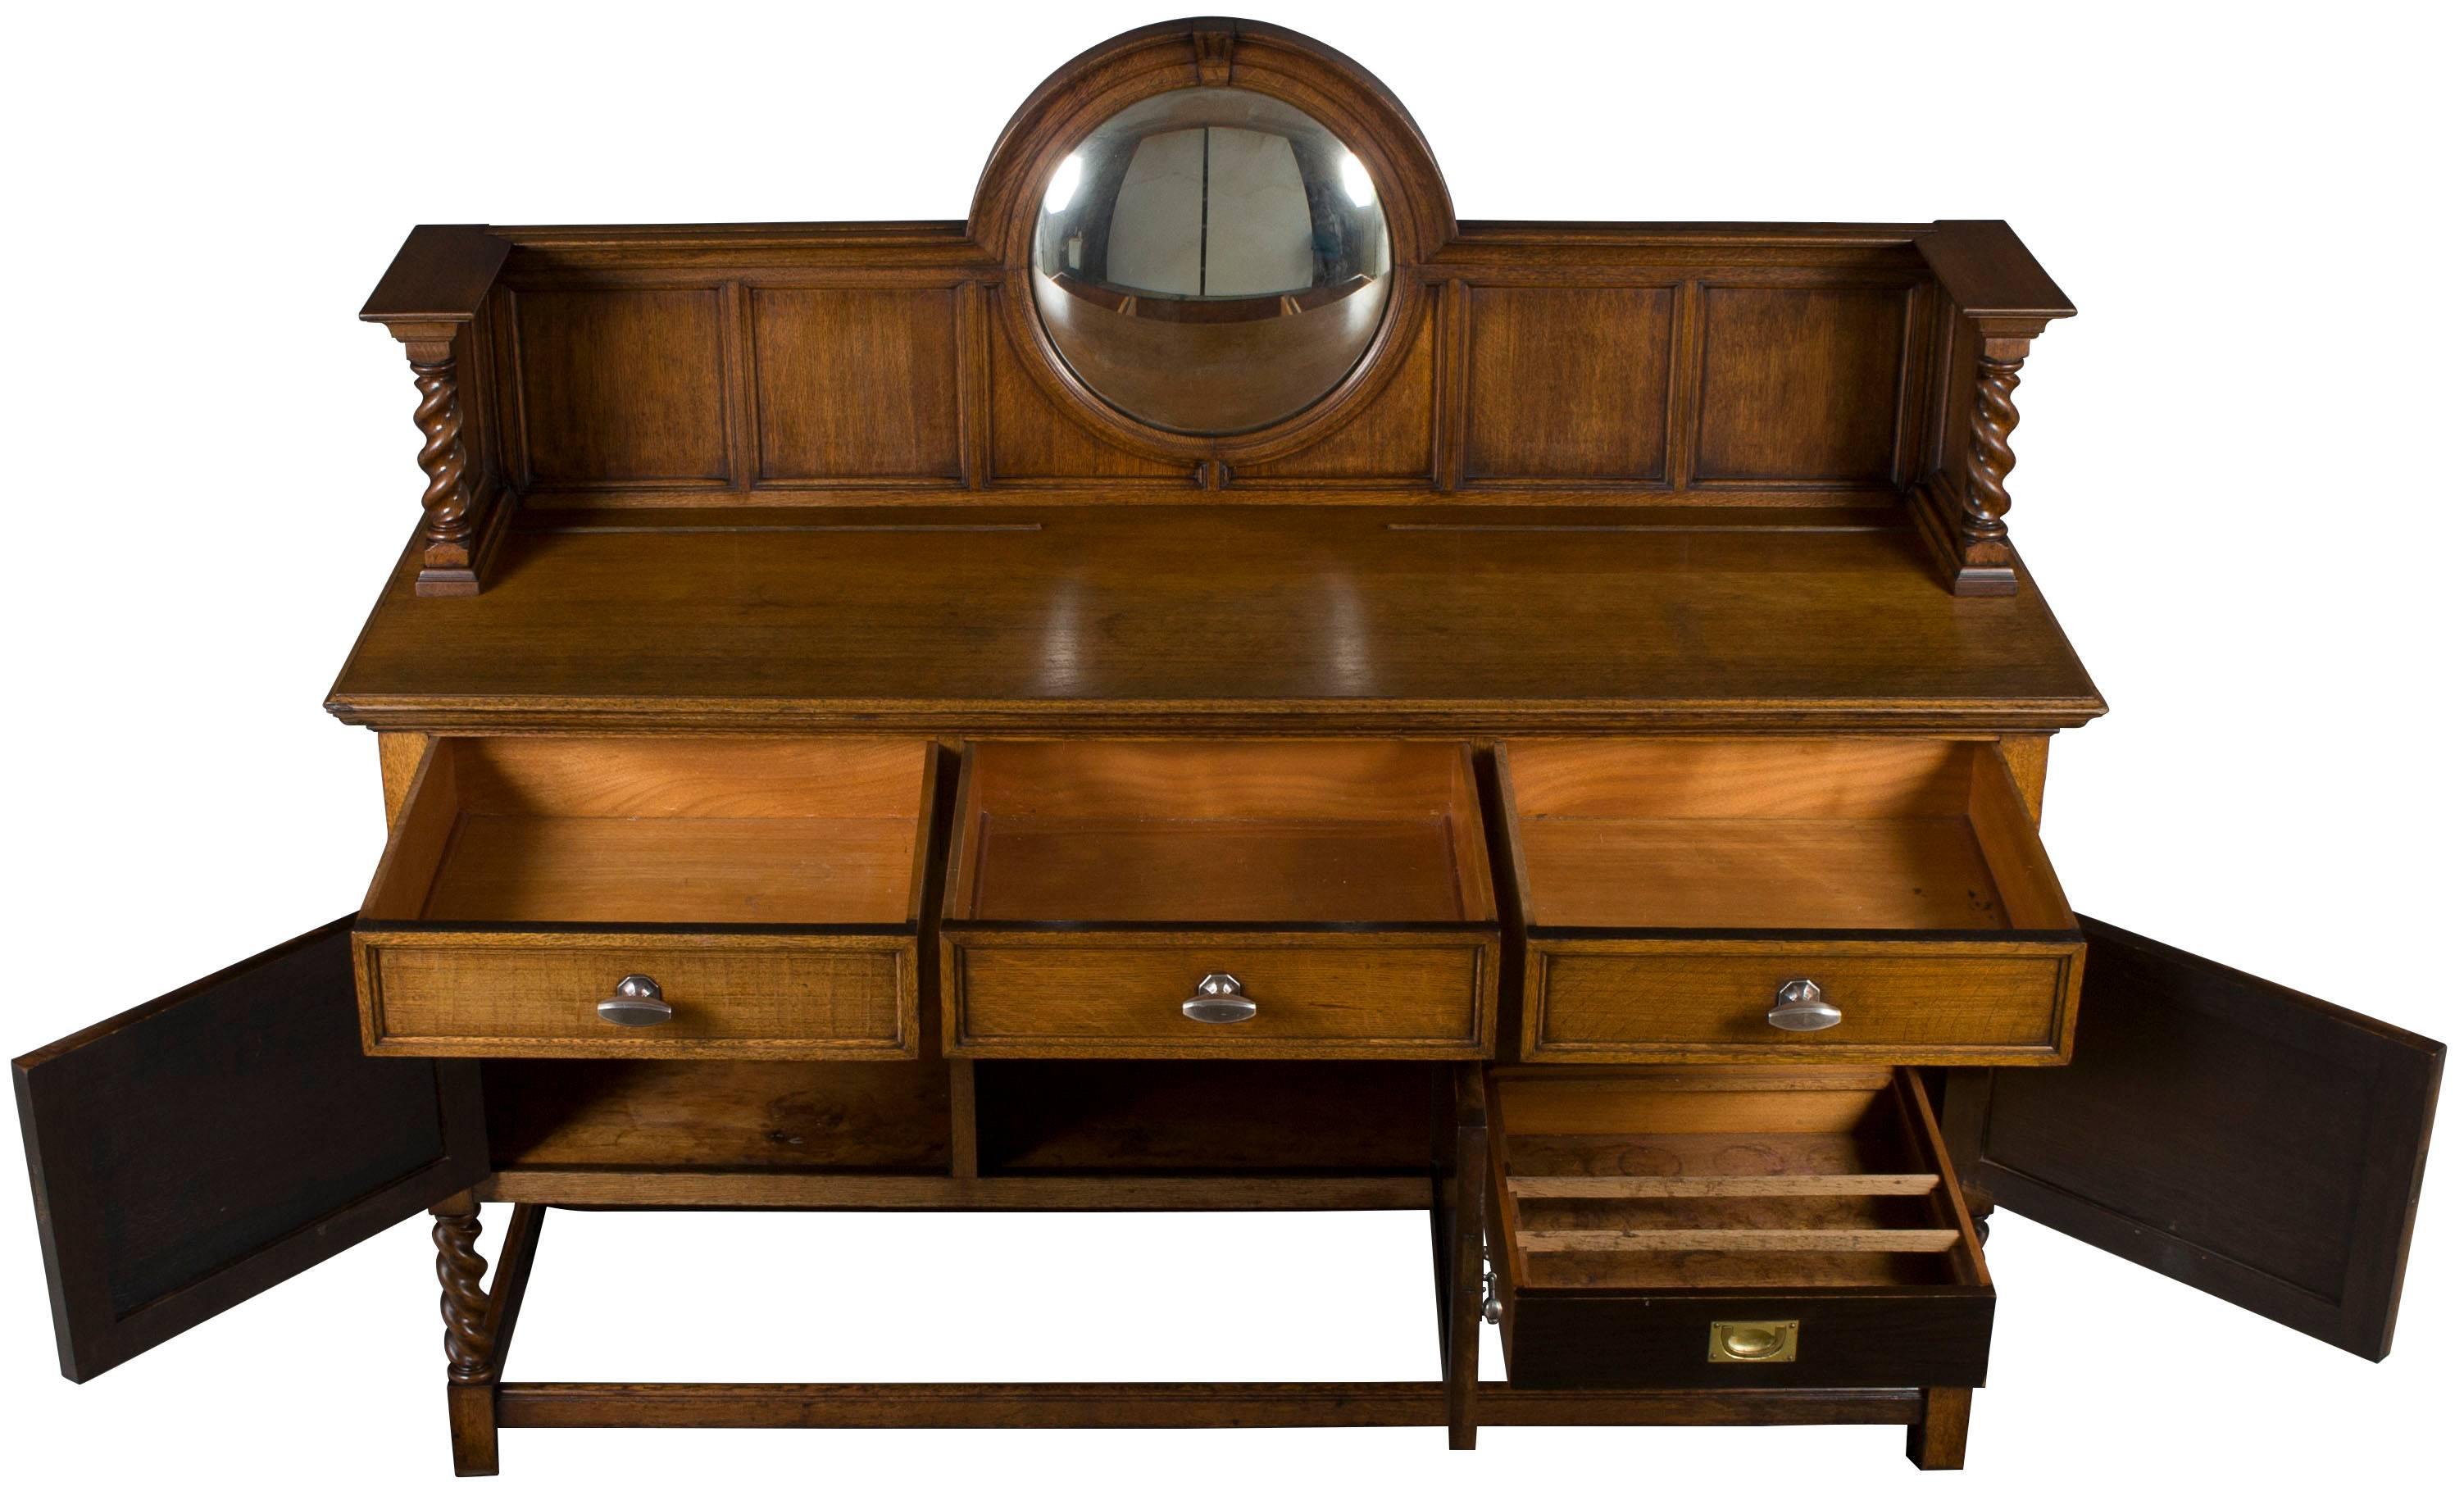 This unique English sideboard was crafted circa 1940 of oak. The oak has a light, honey color to it. Gorgeous turned barley twist is featured on the legs and back splash supports. A round convex mirror on the back splash is a unique touch as well.